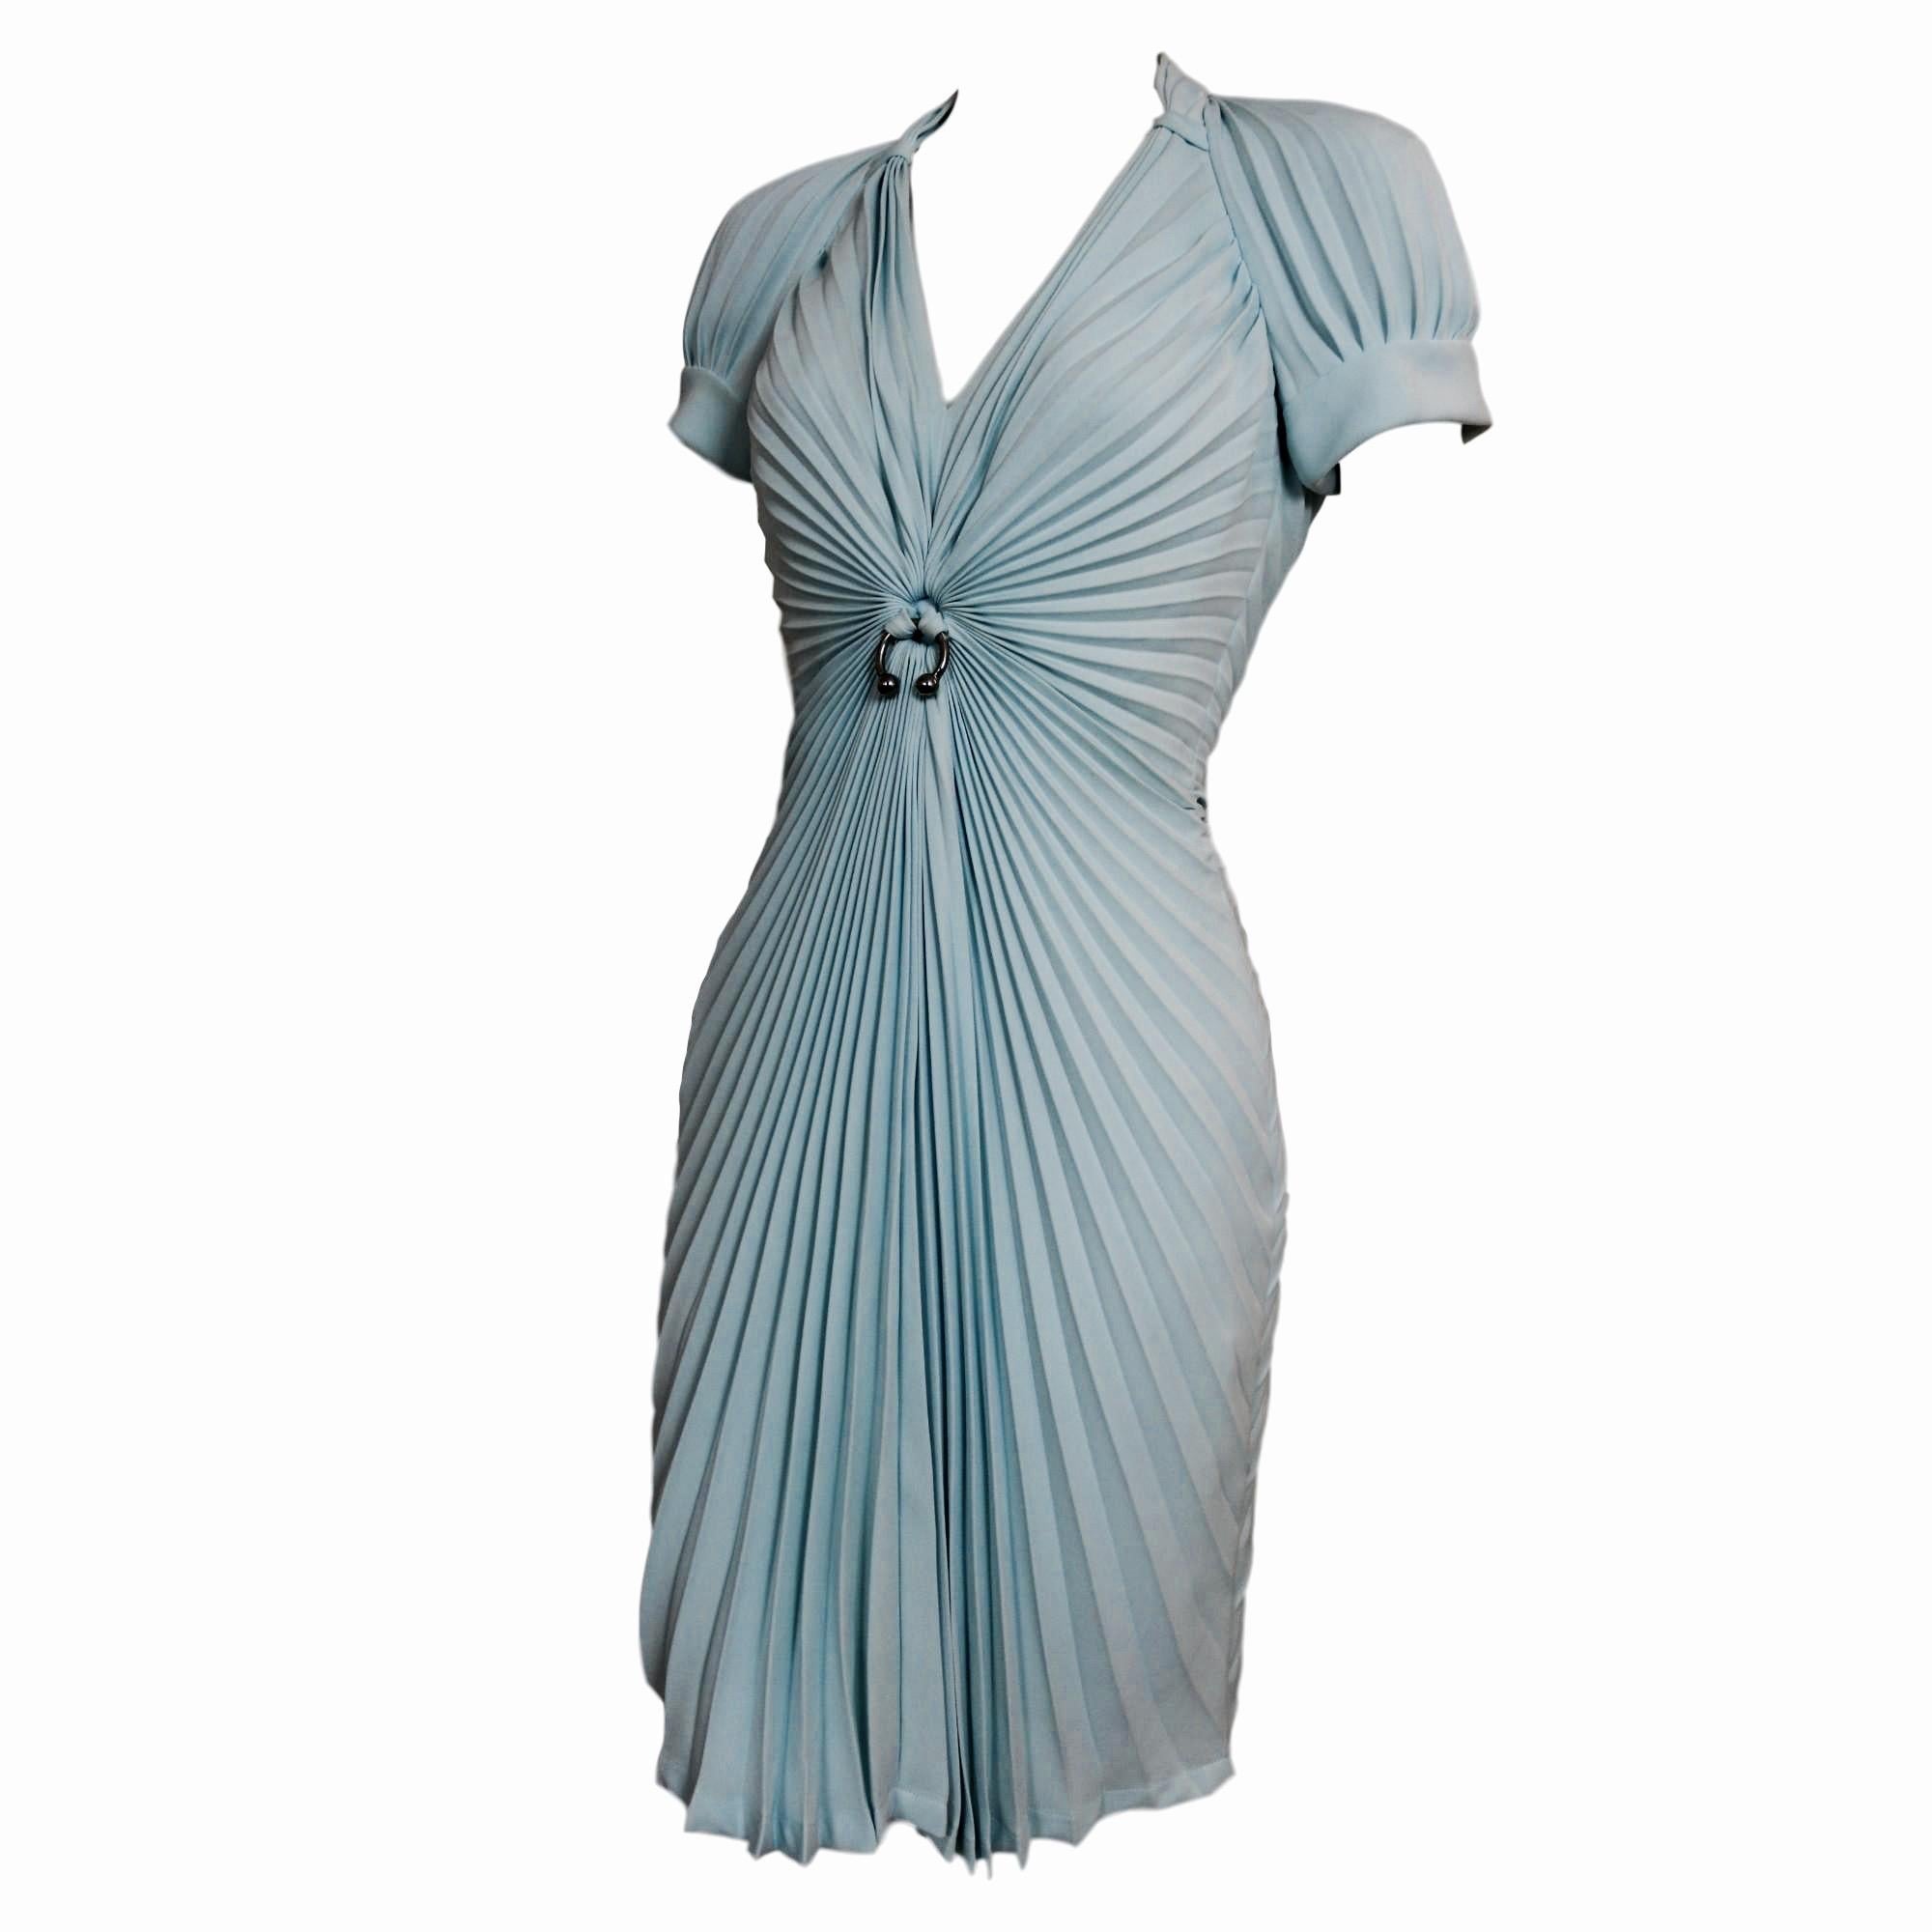 Thierry Mugler Starburst Pleated Dress In Good Condition For Sale In Bath, GB